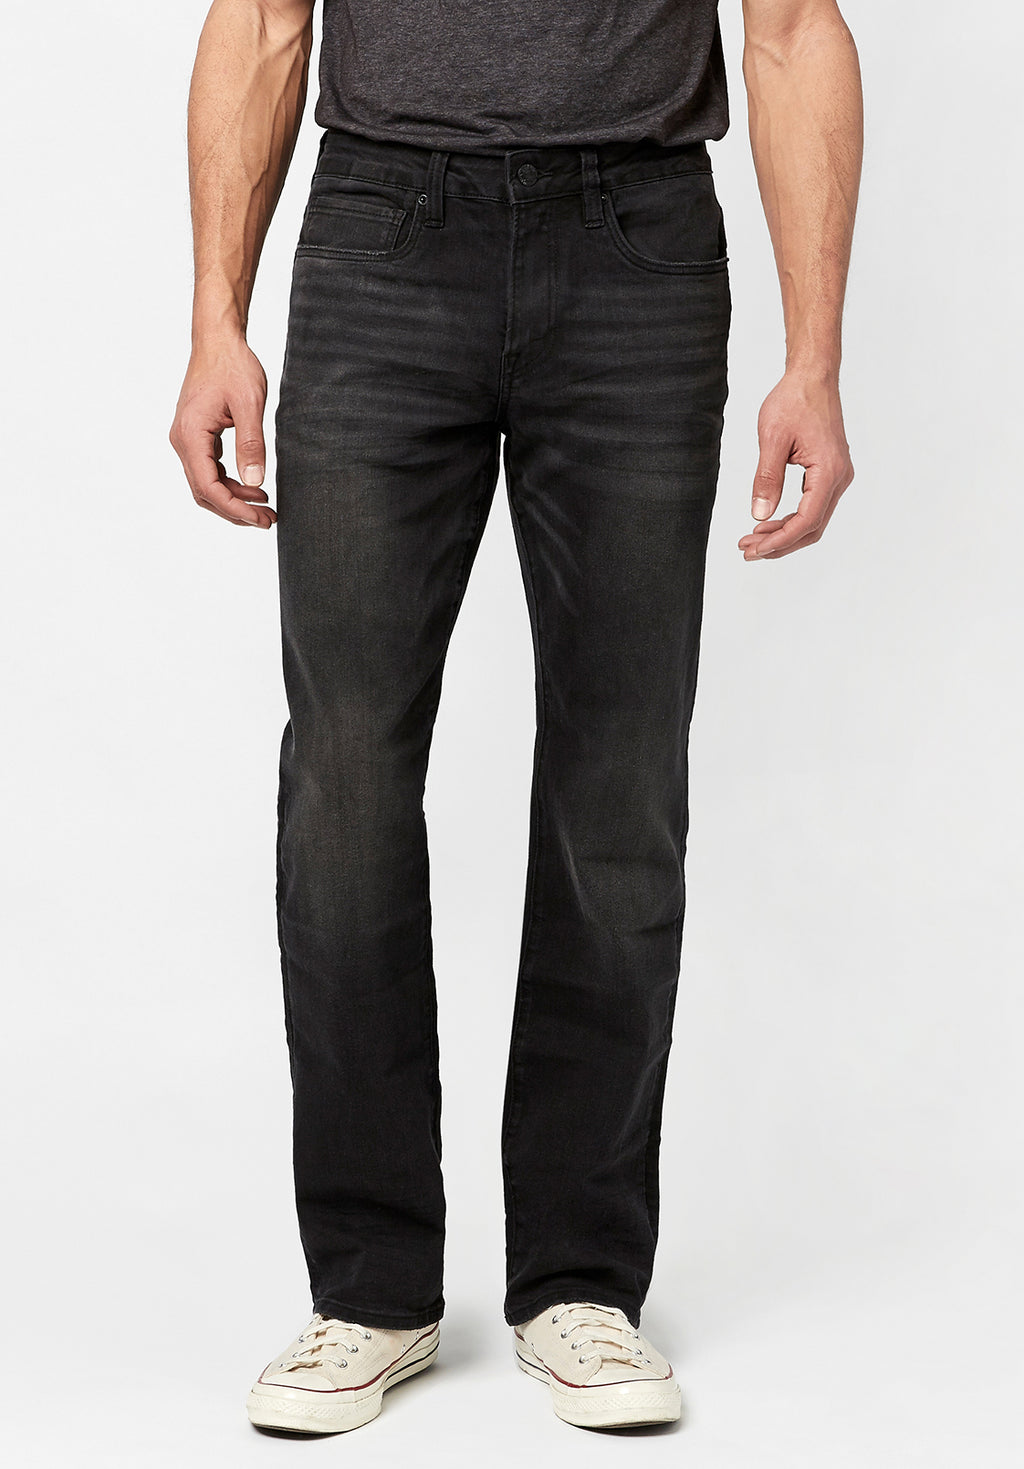 RELAXED STRAIGHT DRIVEN Black Jeans – Buffalo Jeans CA